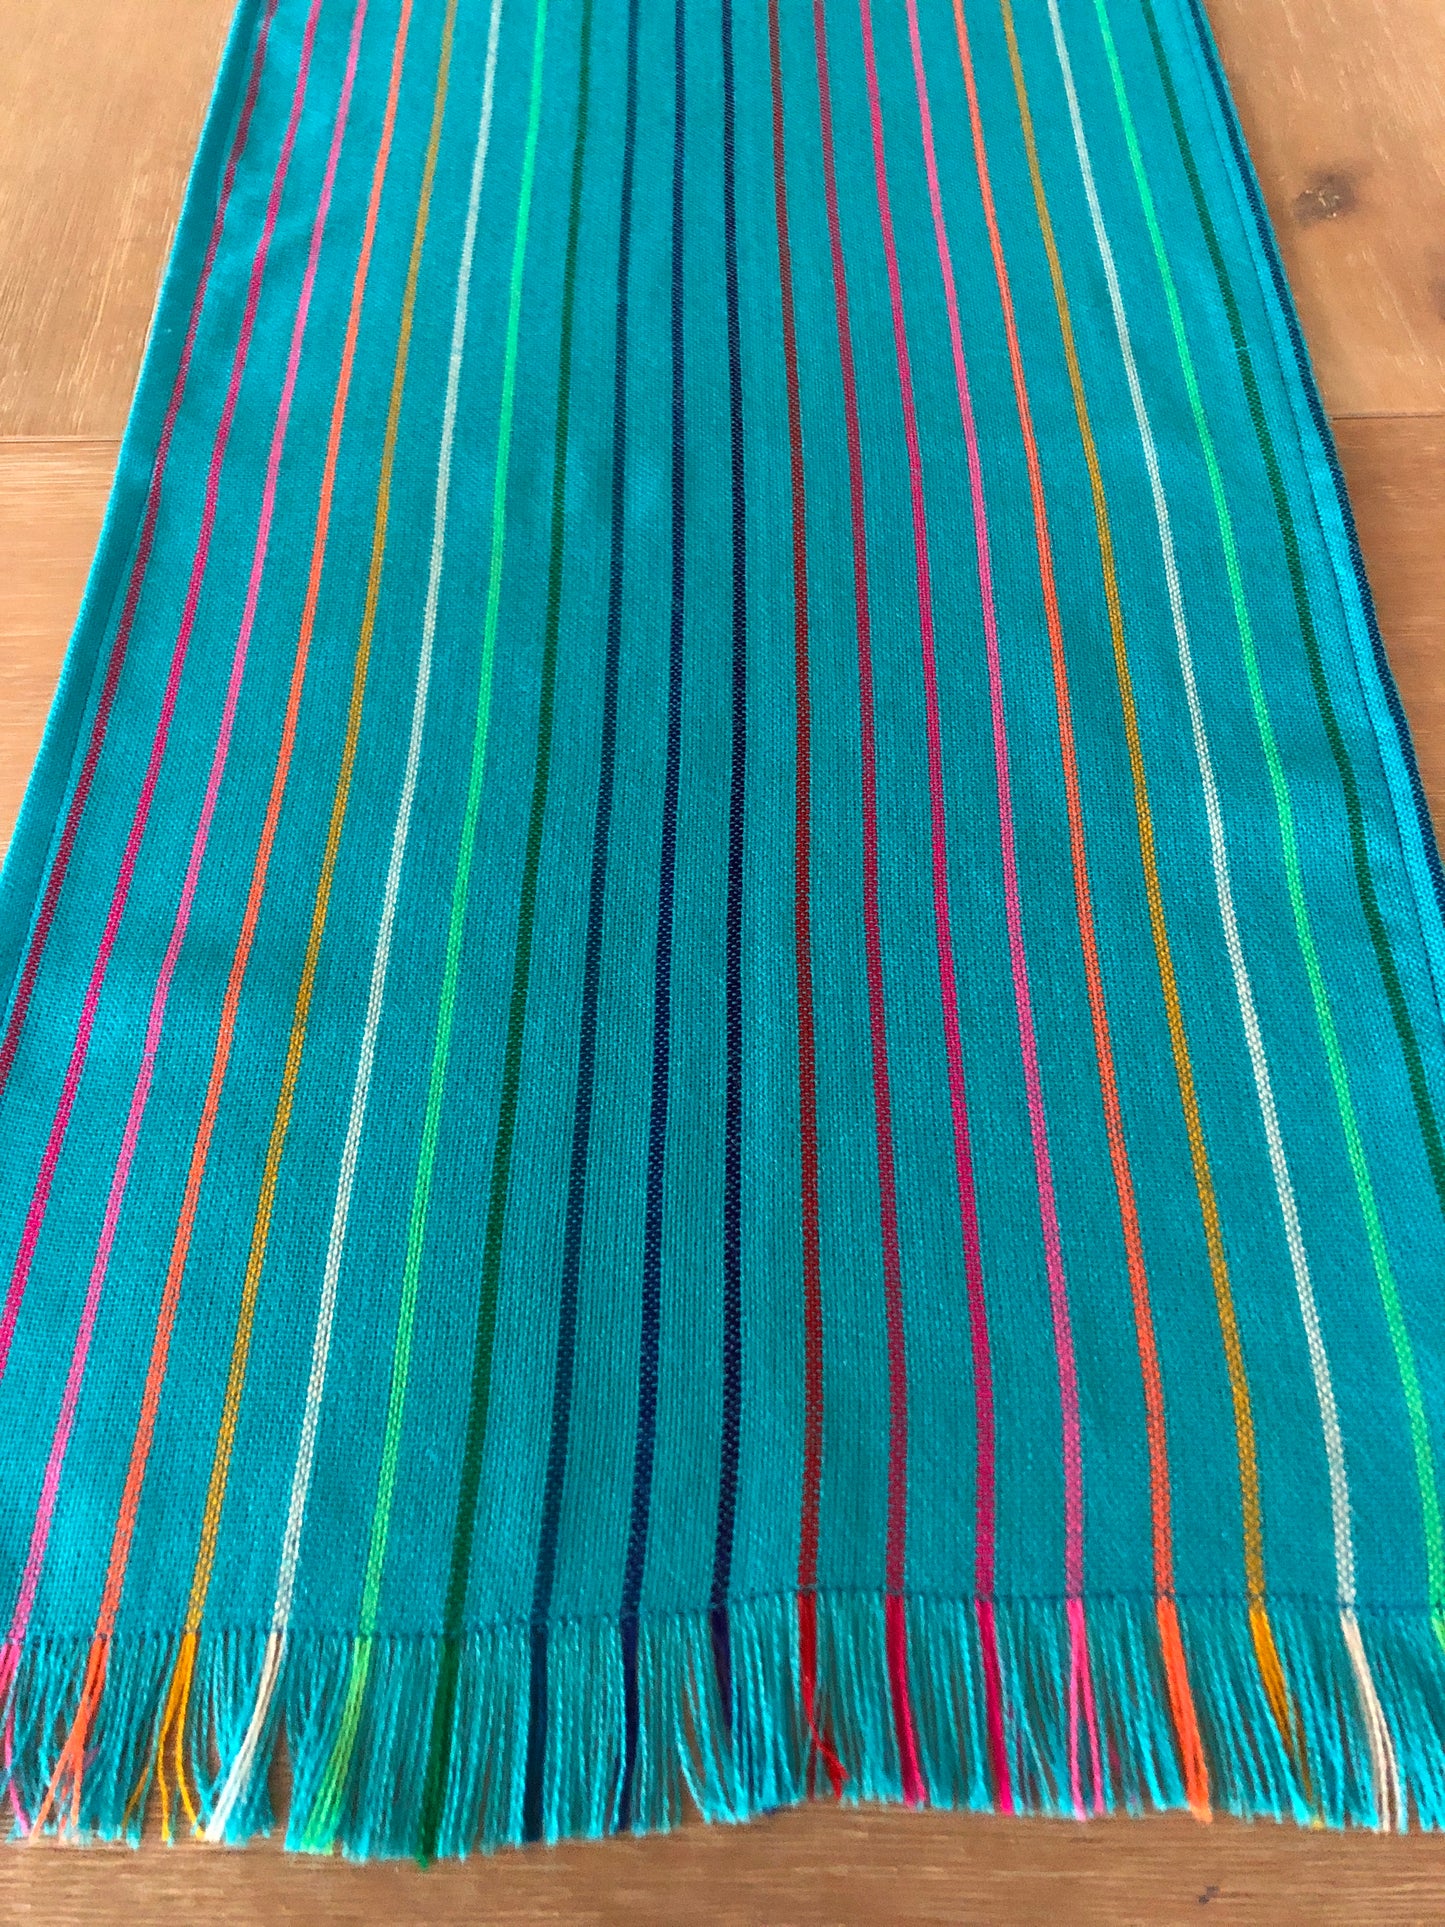 Mexican Fiesta Table Runner or Tablecloth -Turquoise striped